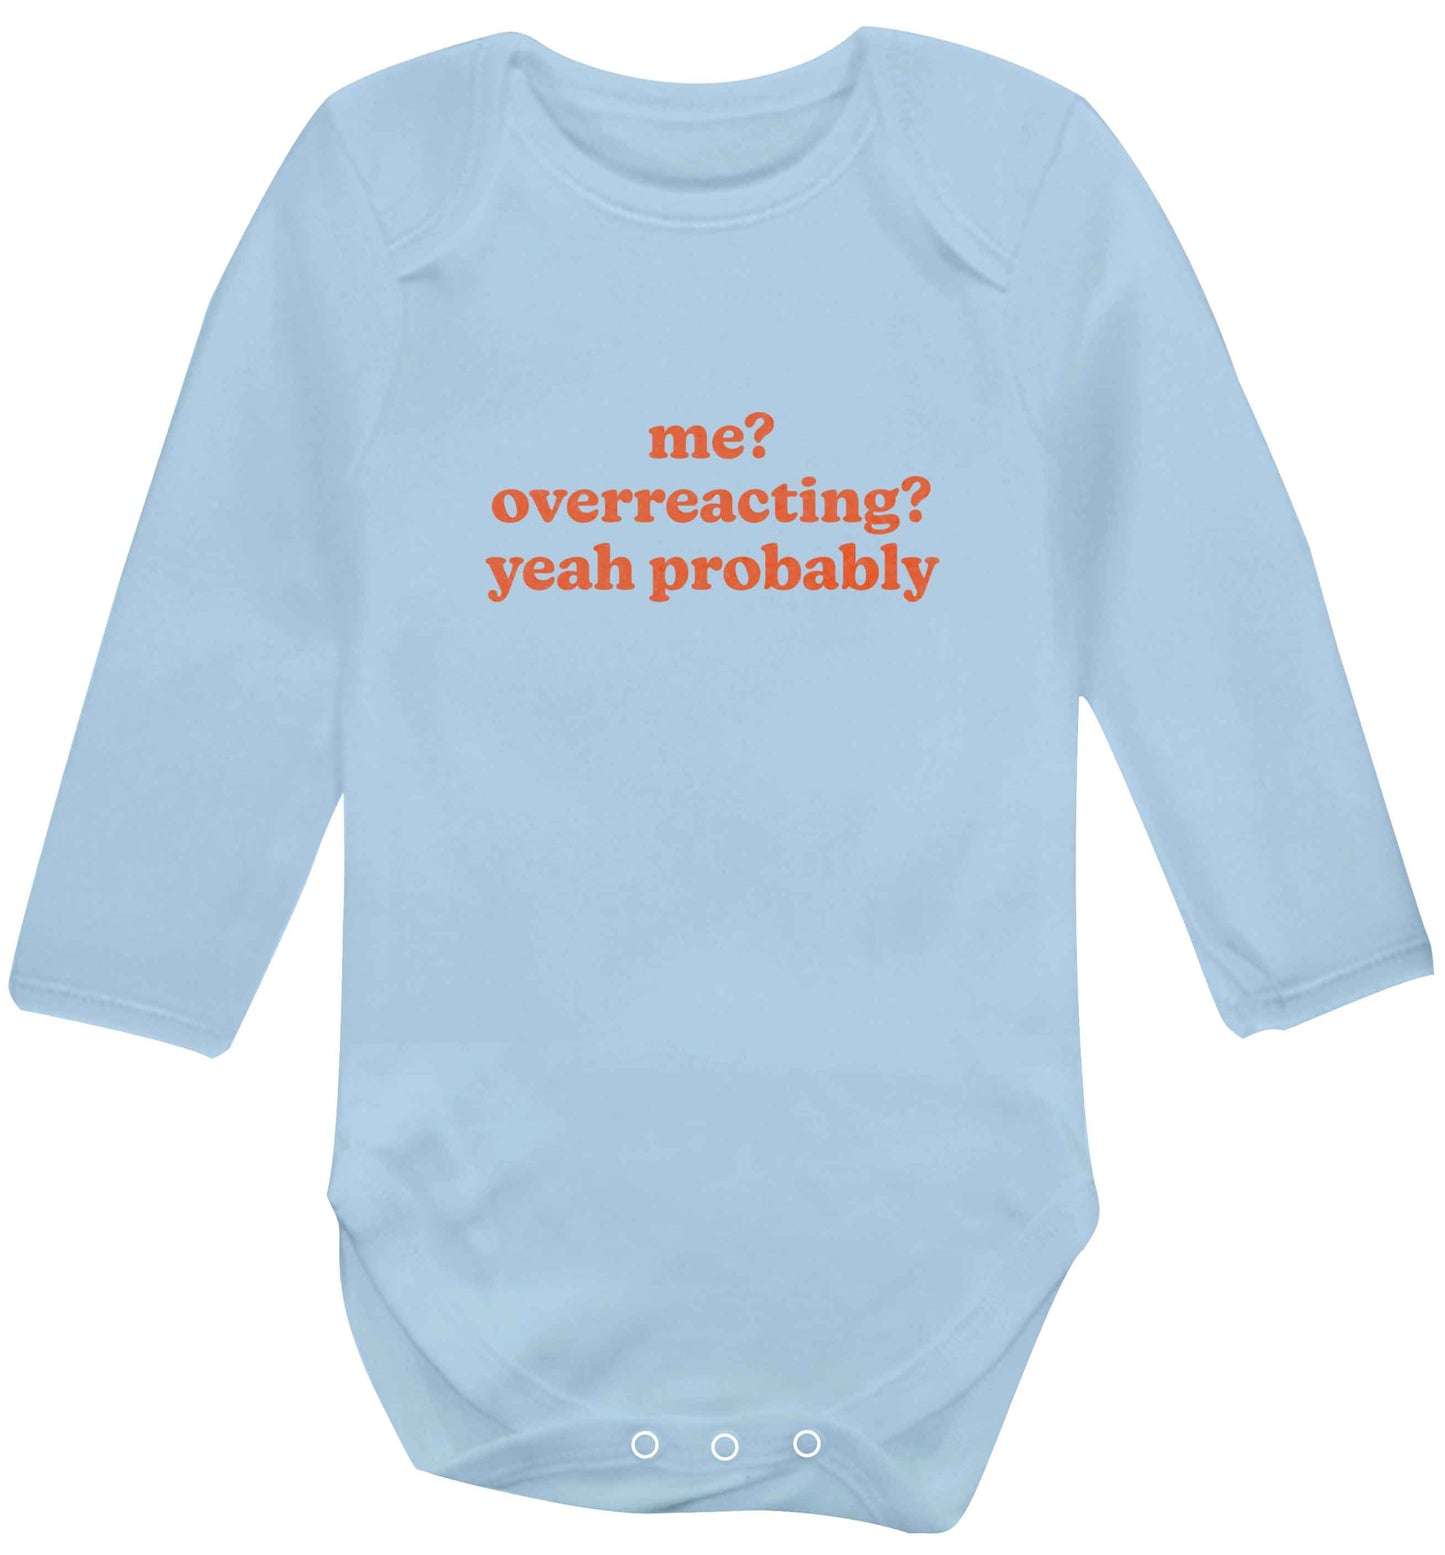 Me? Overreacting? Yeah probably baby vest long sleeved pale blue 6-12 months